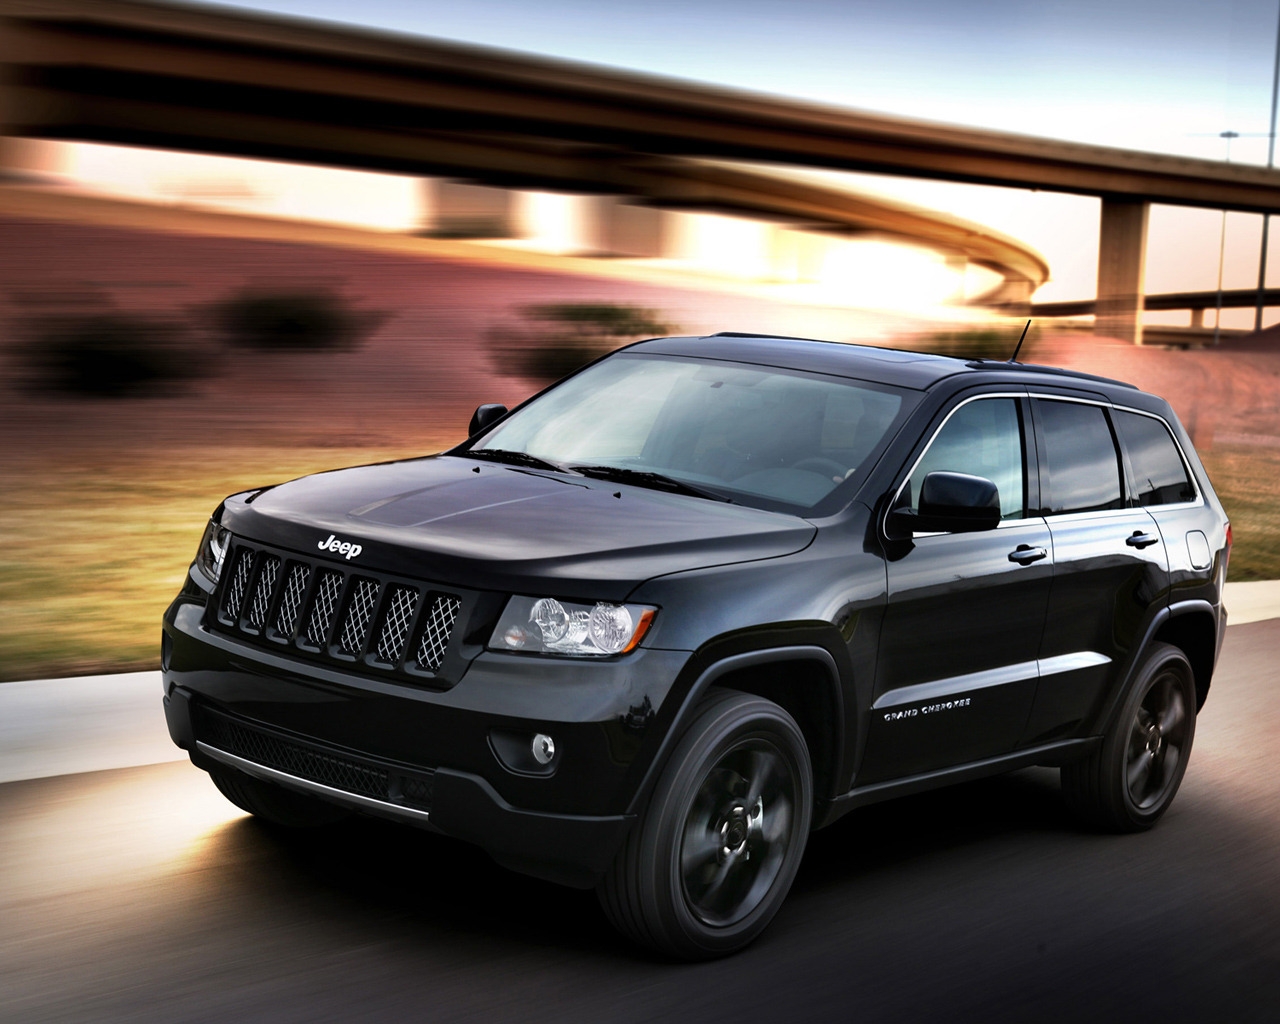 Jeep Grand Cherokee Speed Concept for 1280 x 1024 resolution